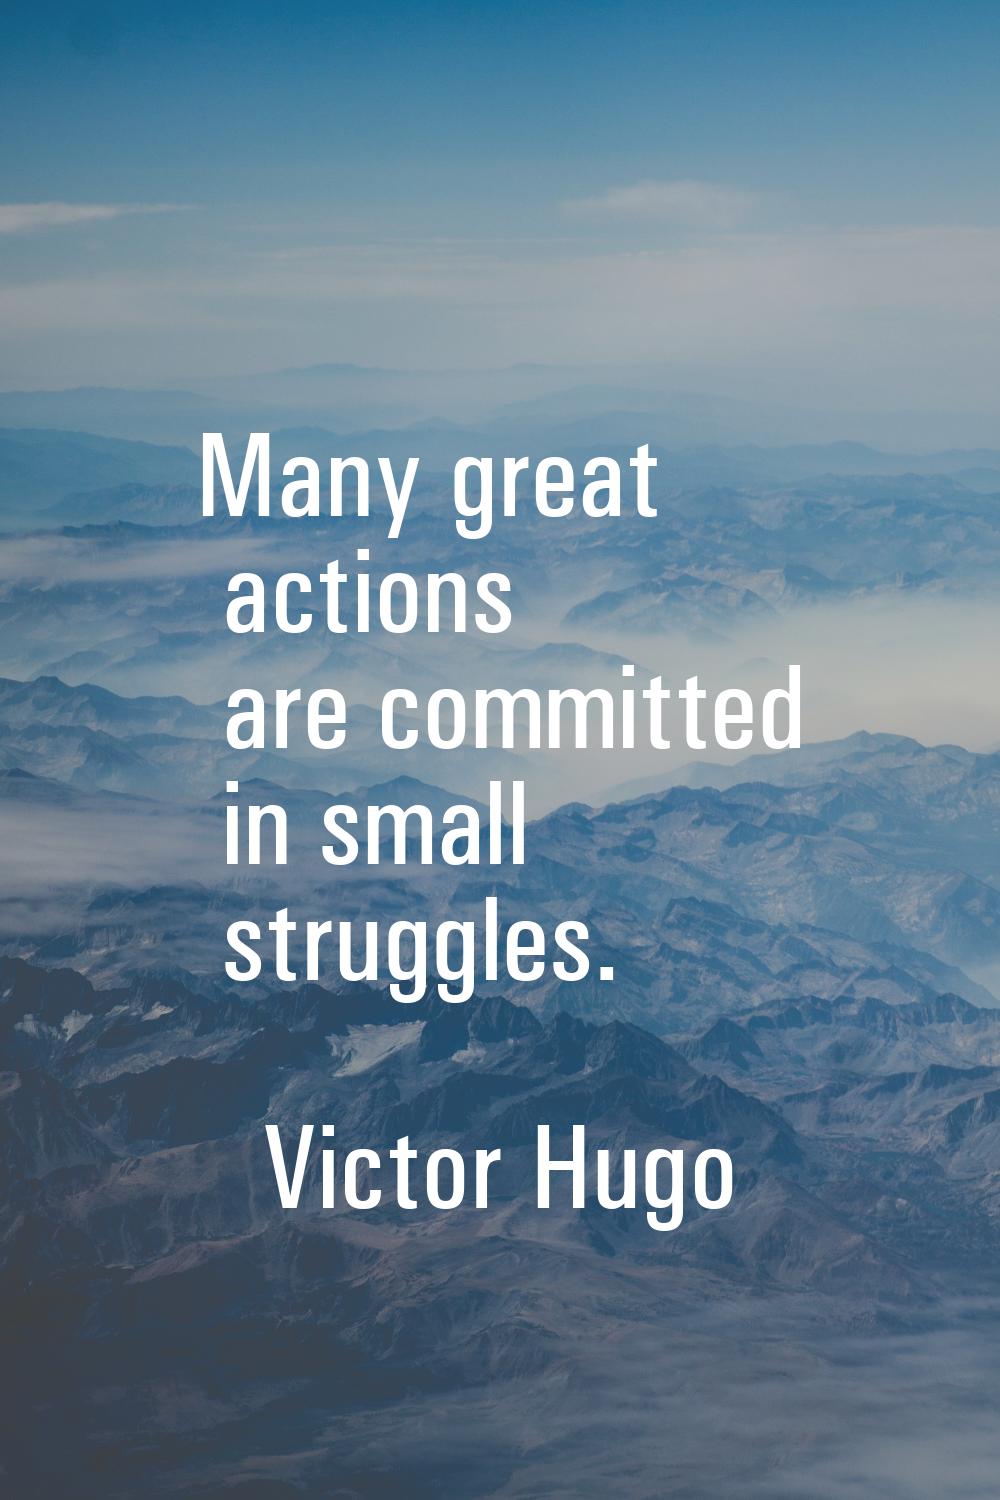 Many great actions are committed in small struggles.